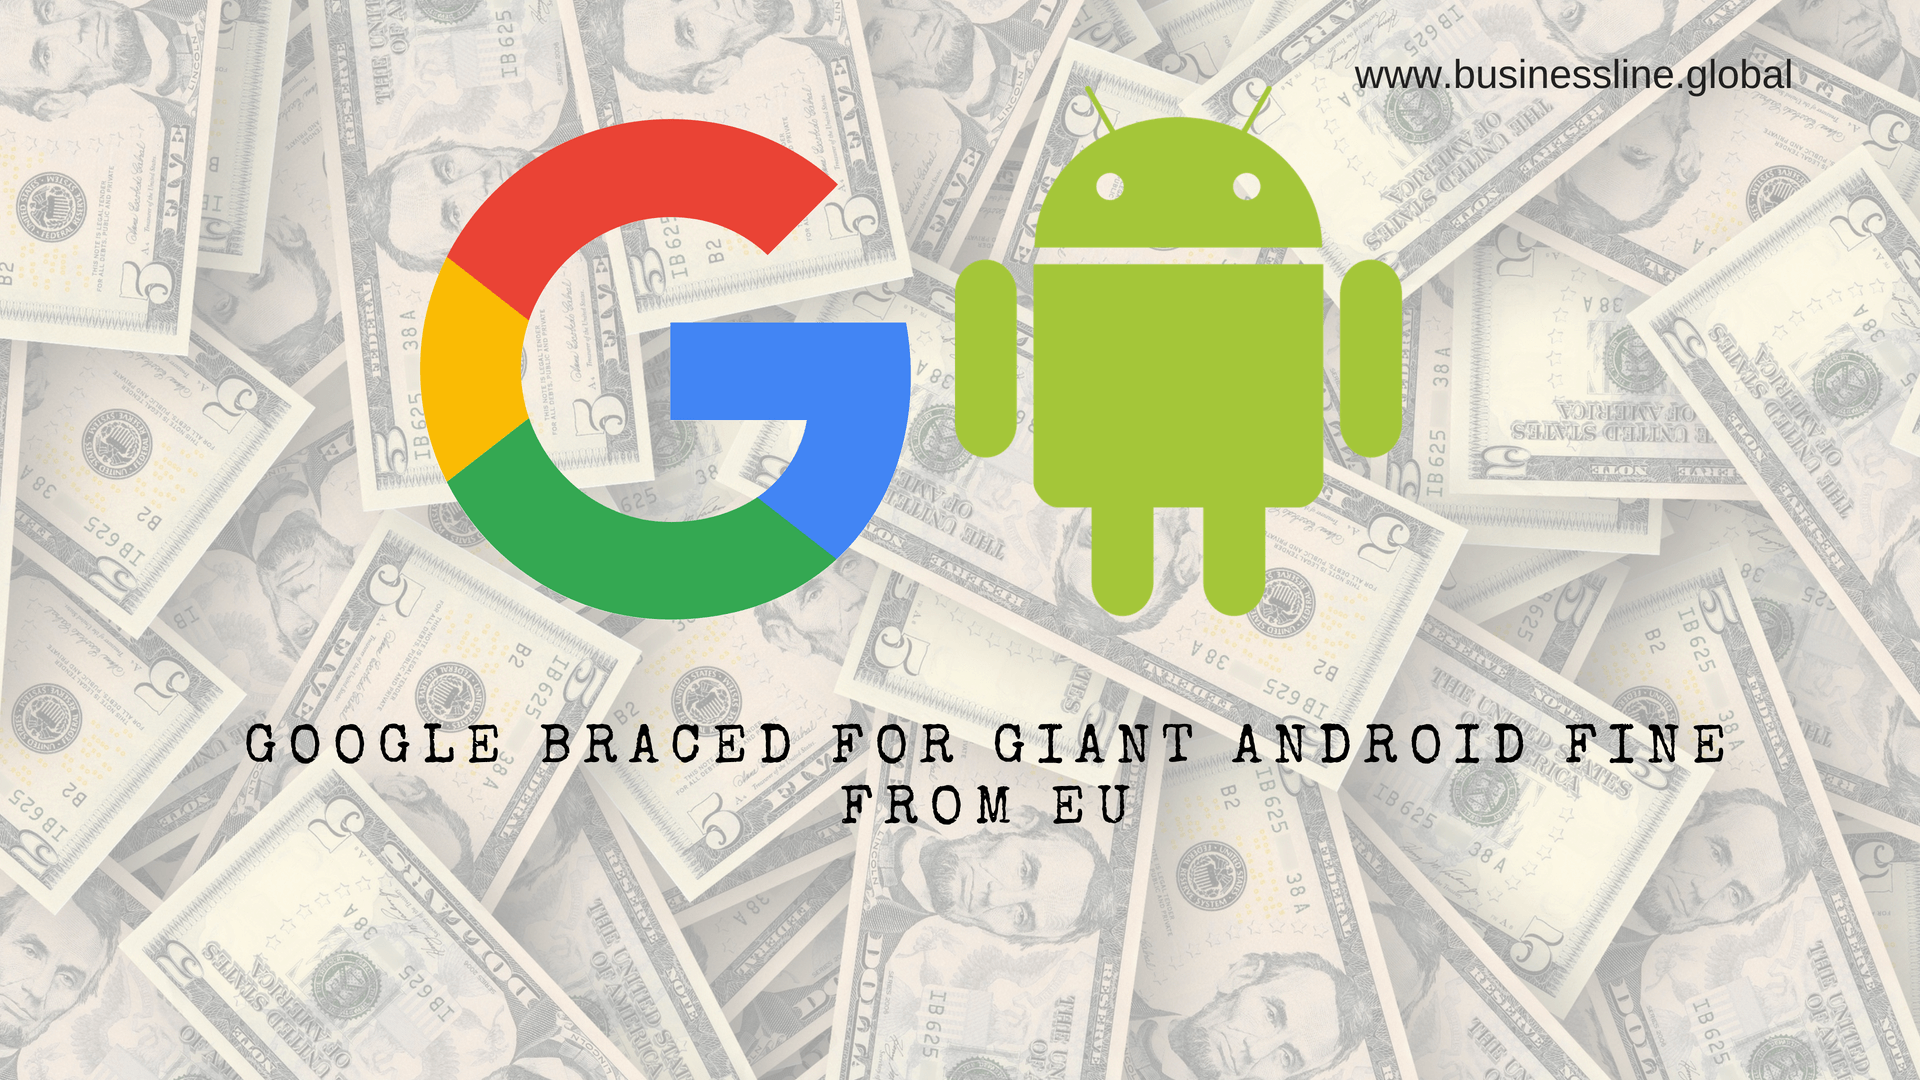 Google braced for giant Android fine from EU